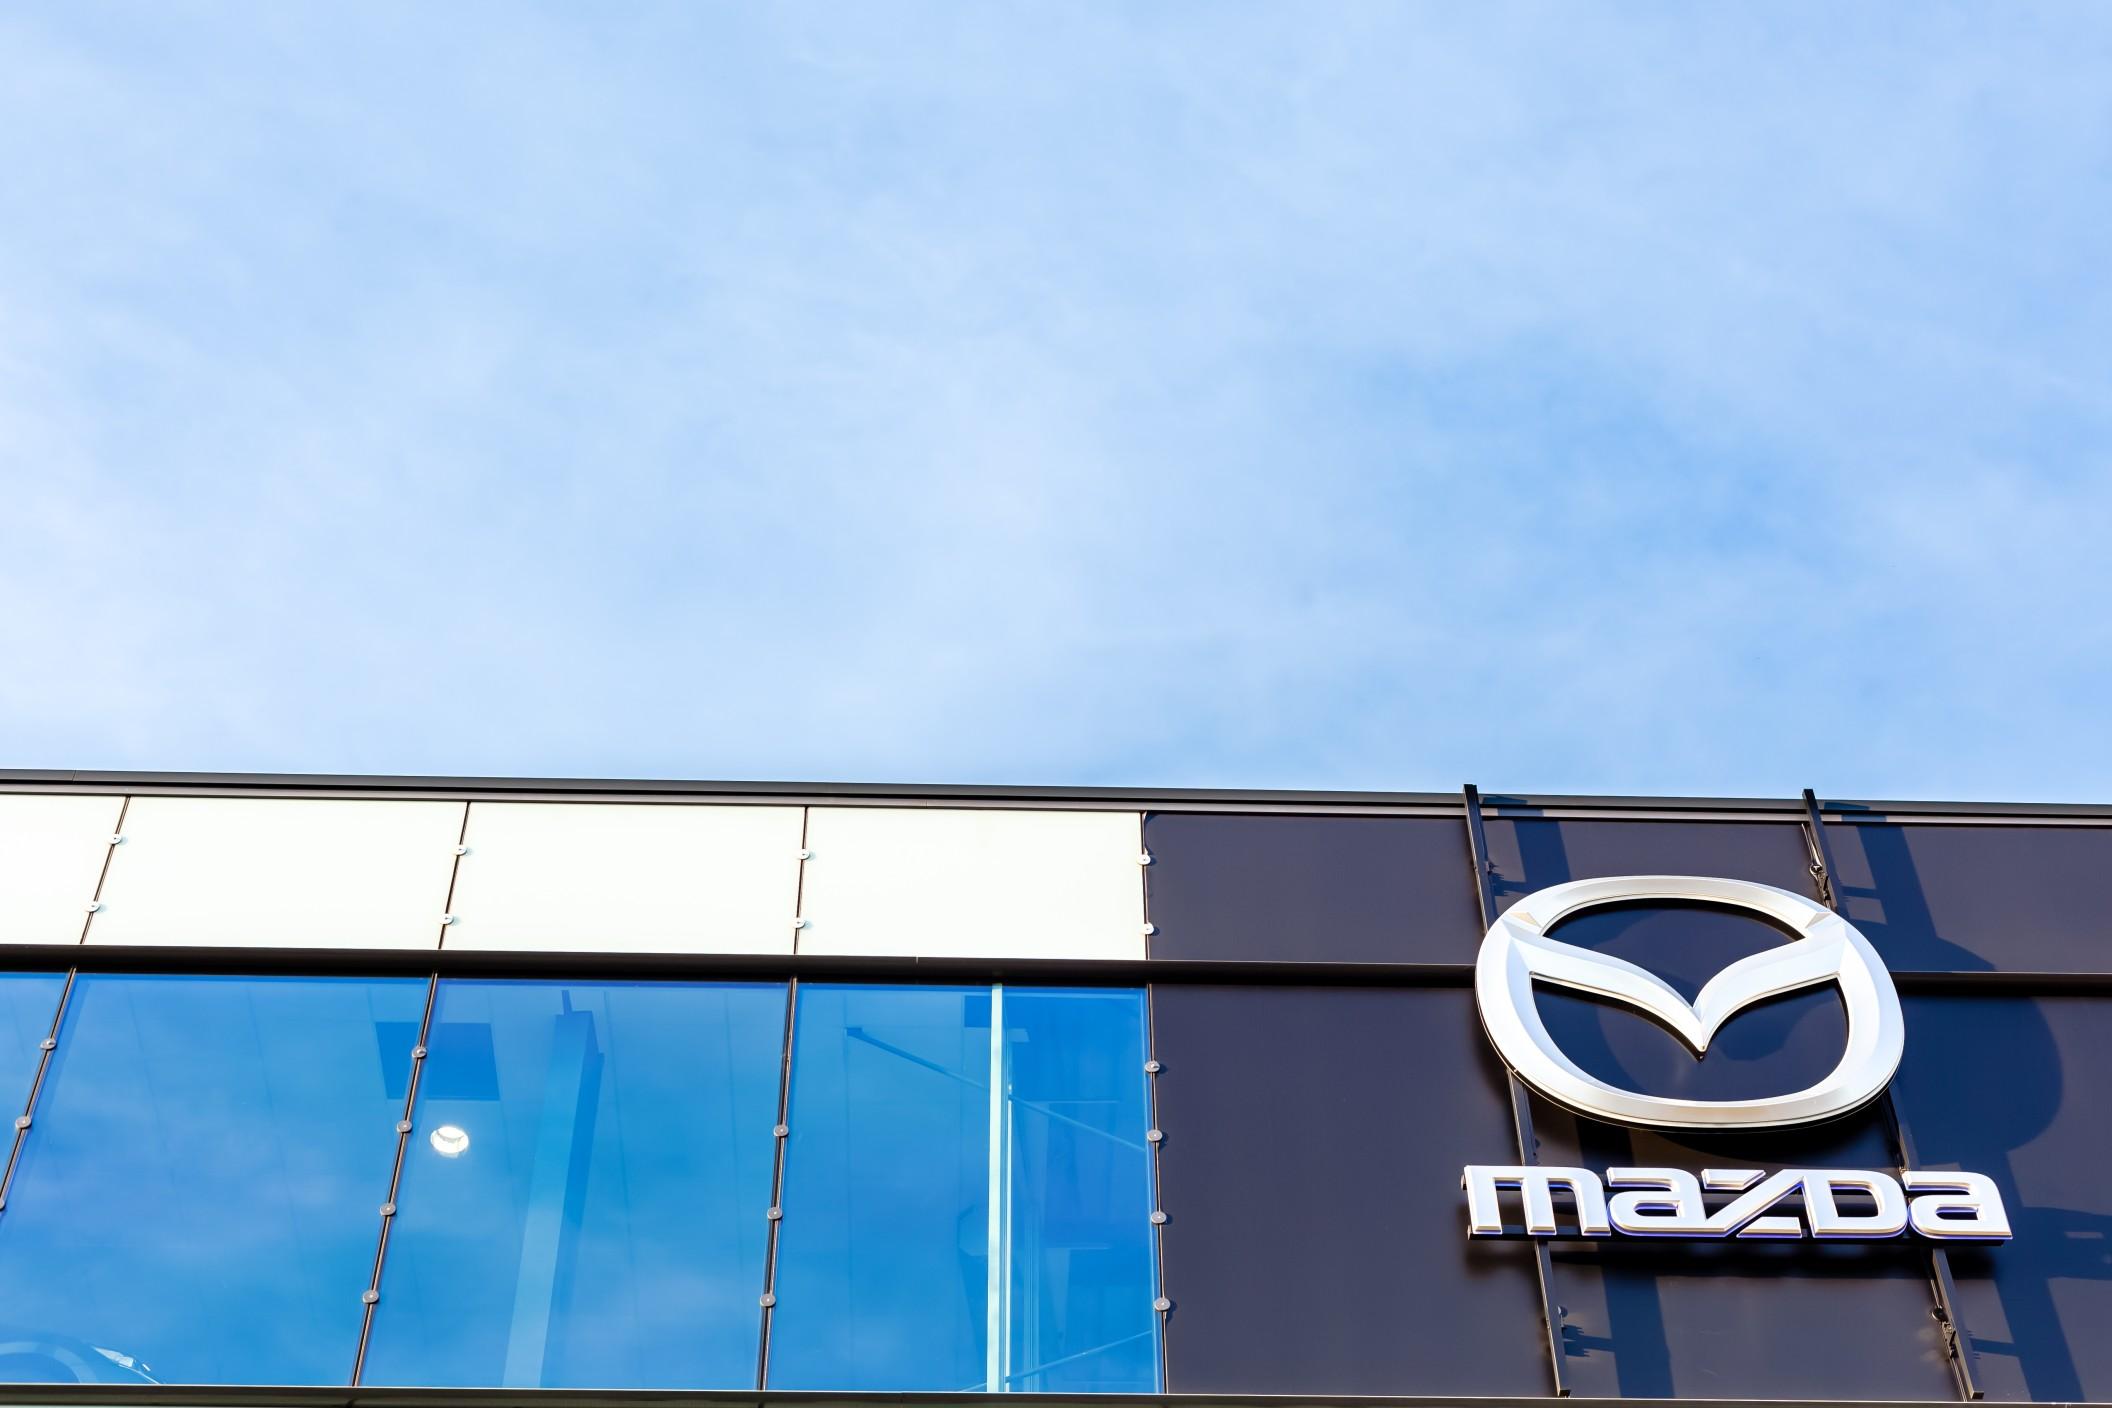 Some Mazda dealerships in Texas are providing educators with free oil changes and car washes until Sept. 30.